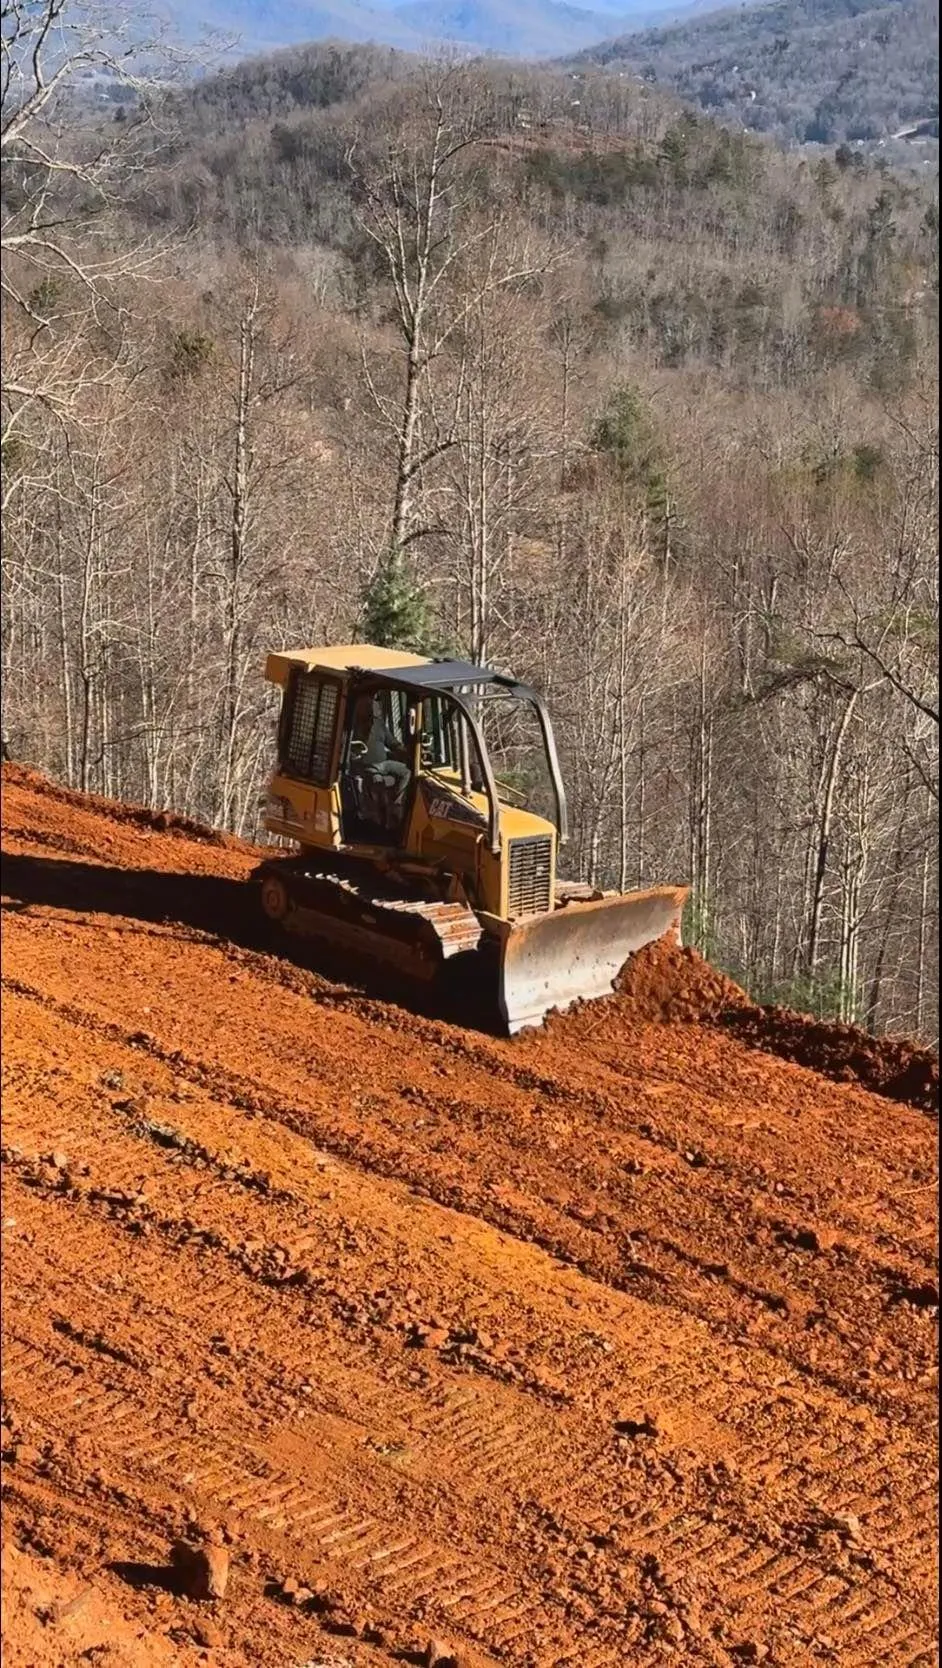 Land Clearing for Gibson Grade Works in Towns County, GA